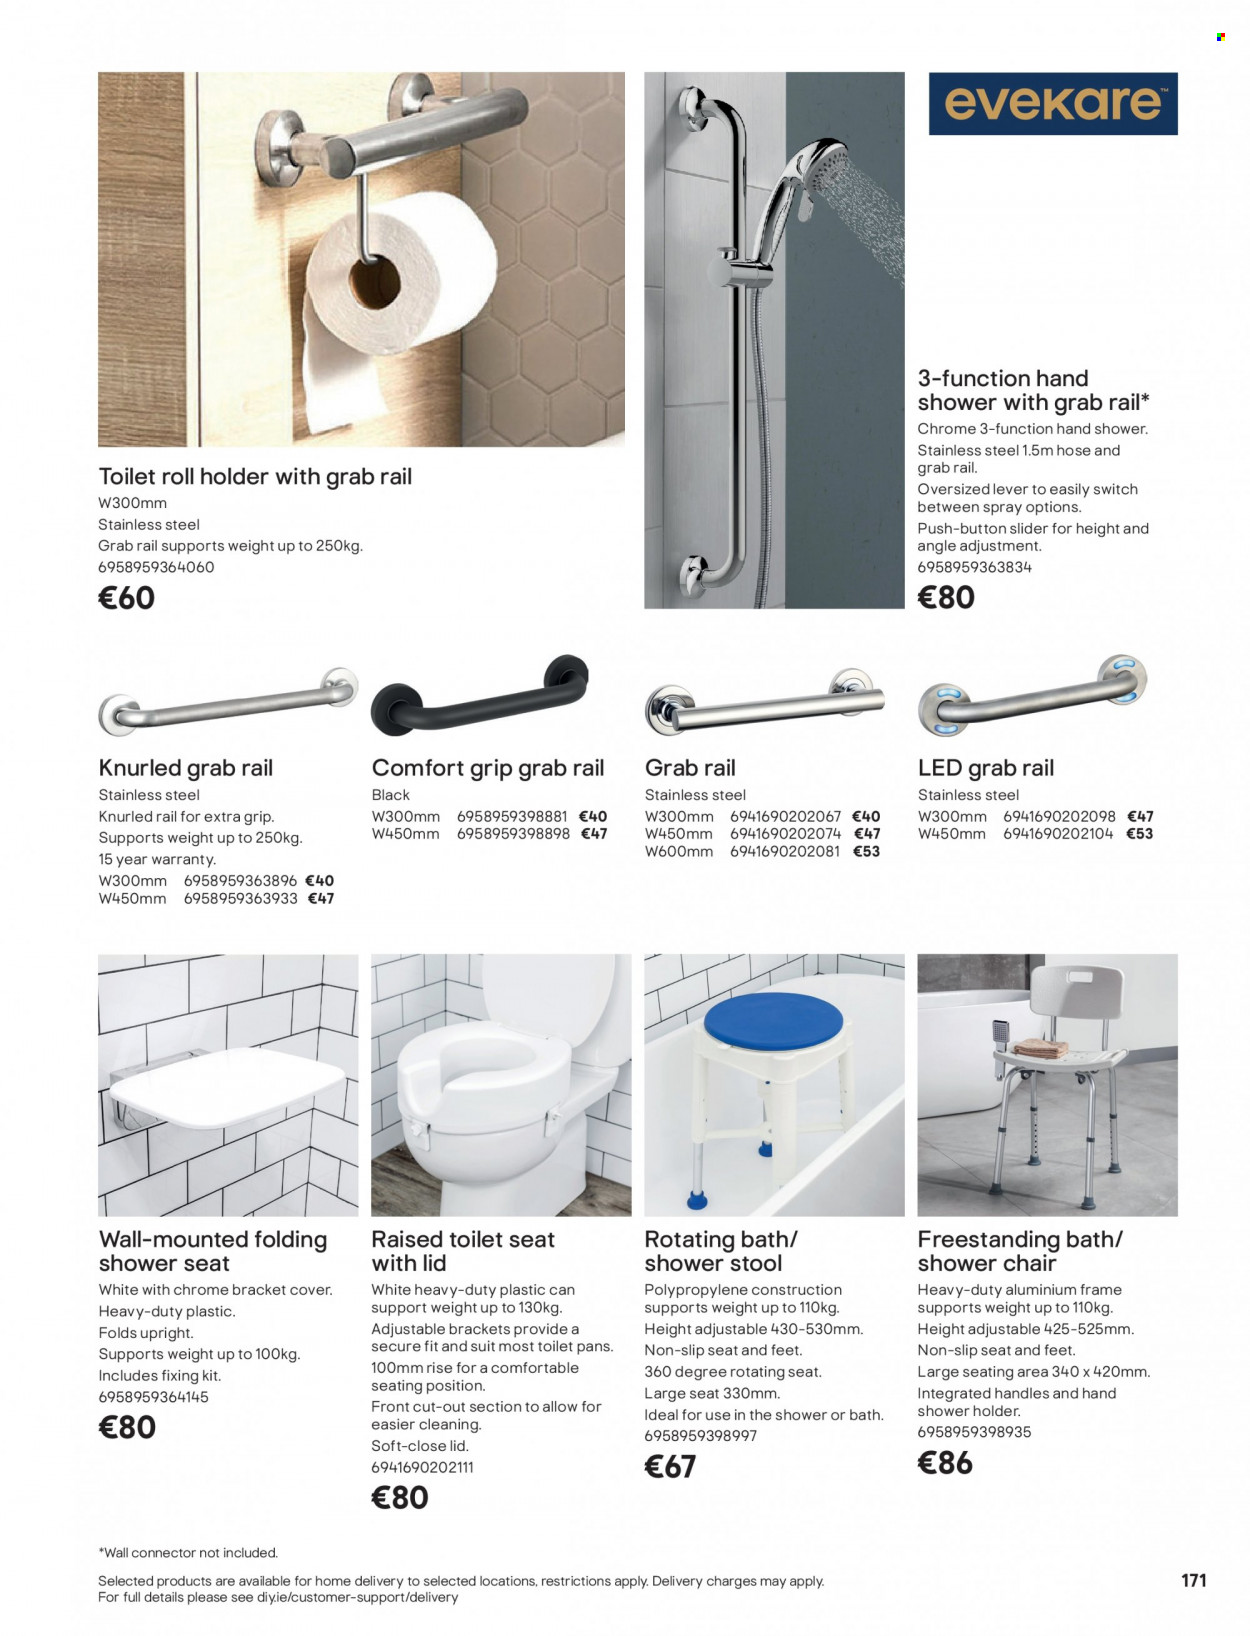 B&Q offer  - Sales products - stool, chair, toilet roll holder, hand shower, toilet seat. Page 171.